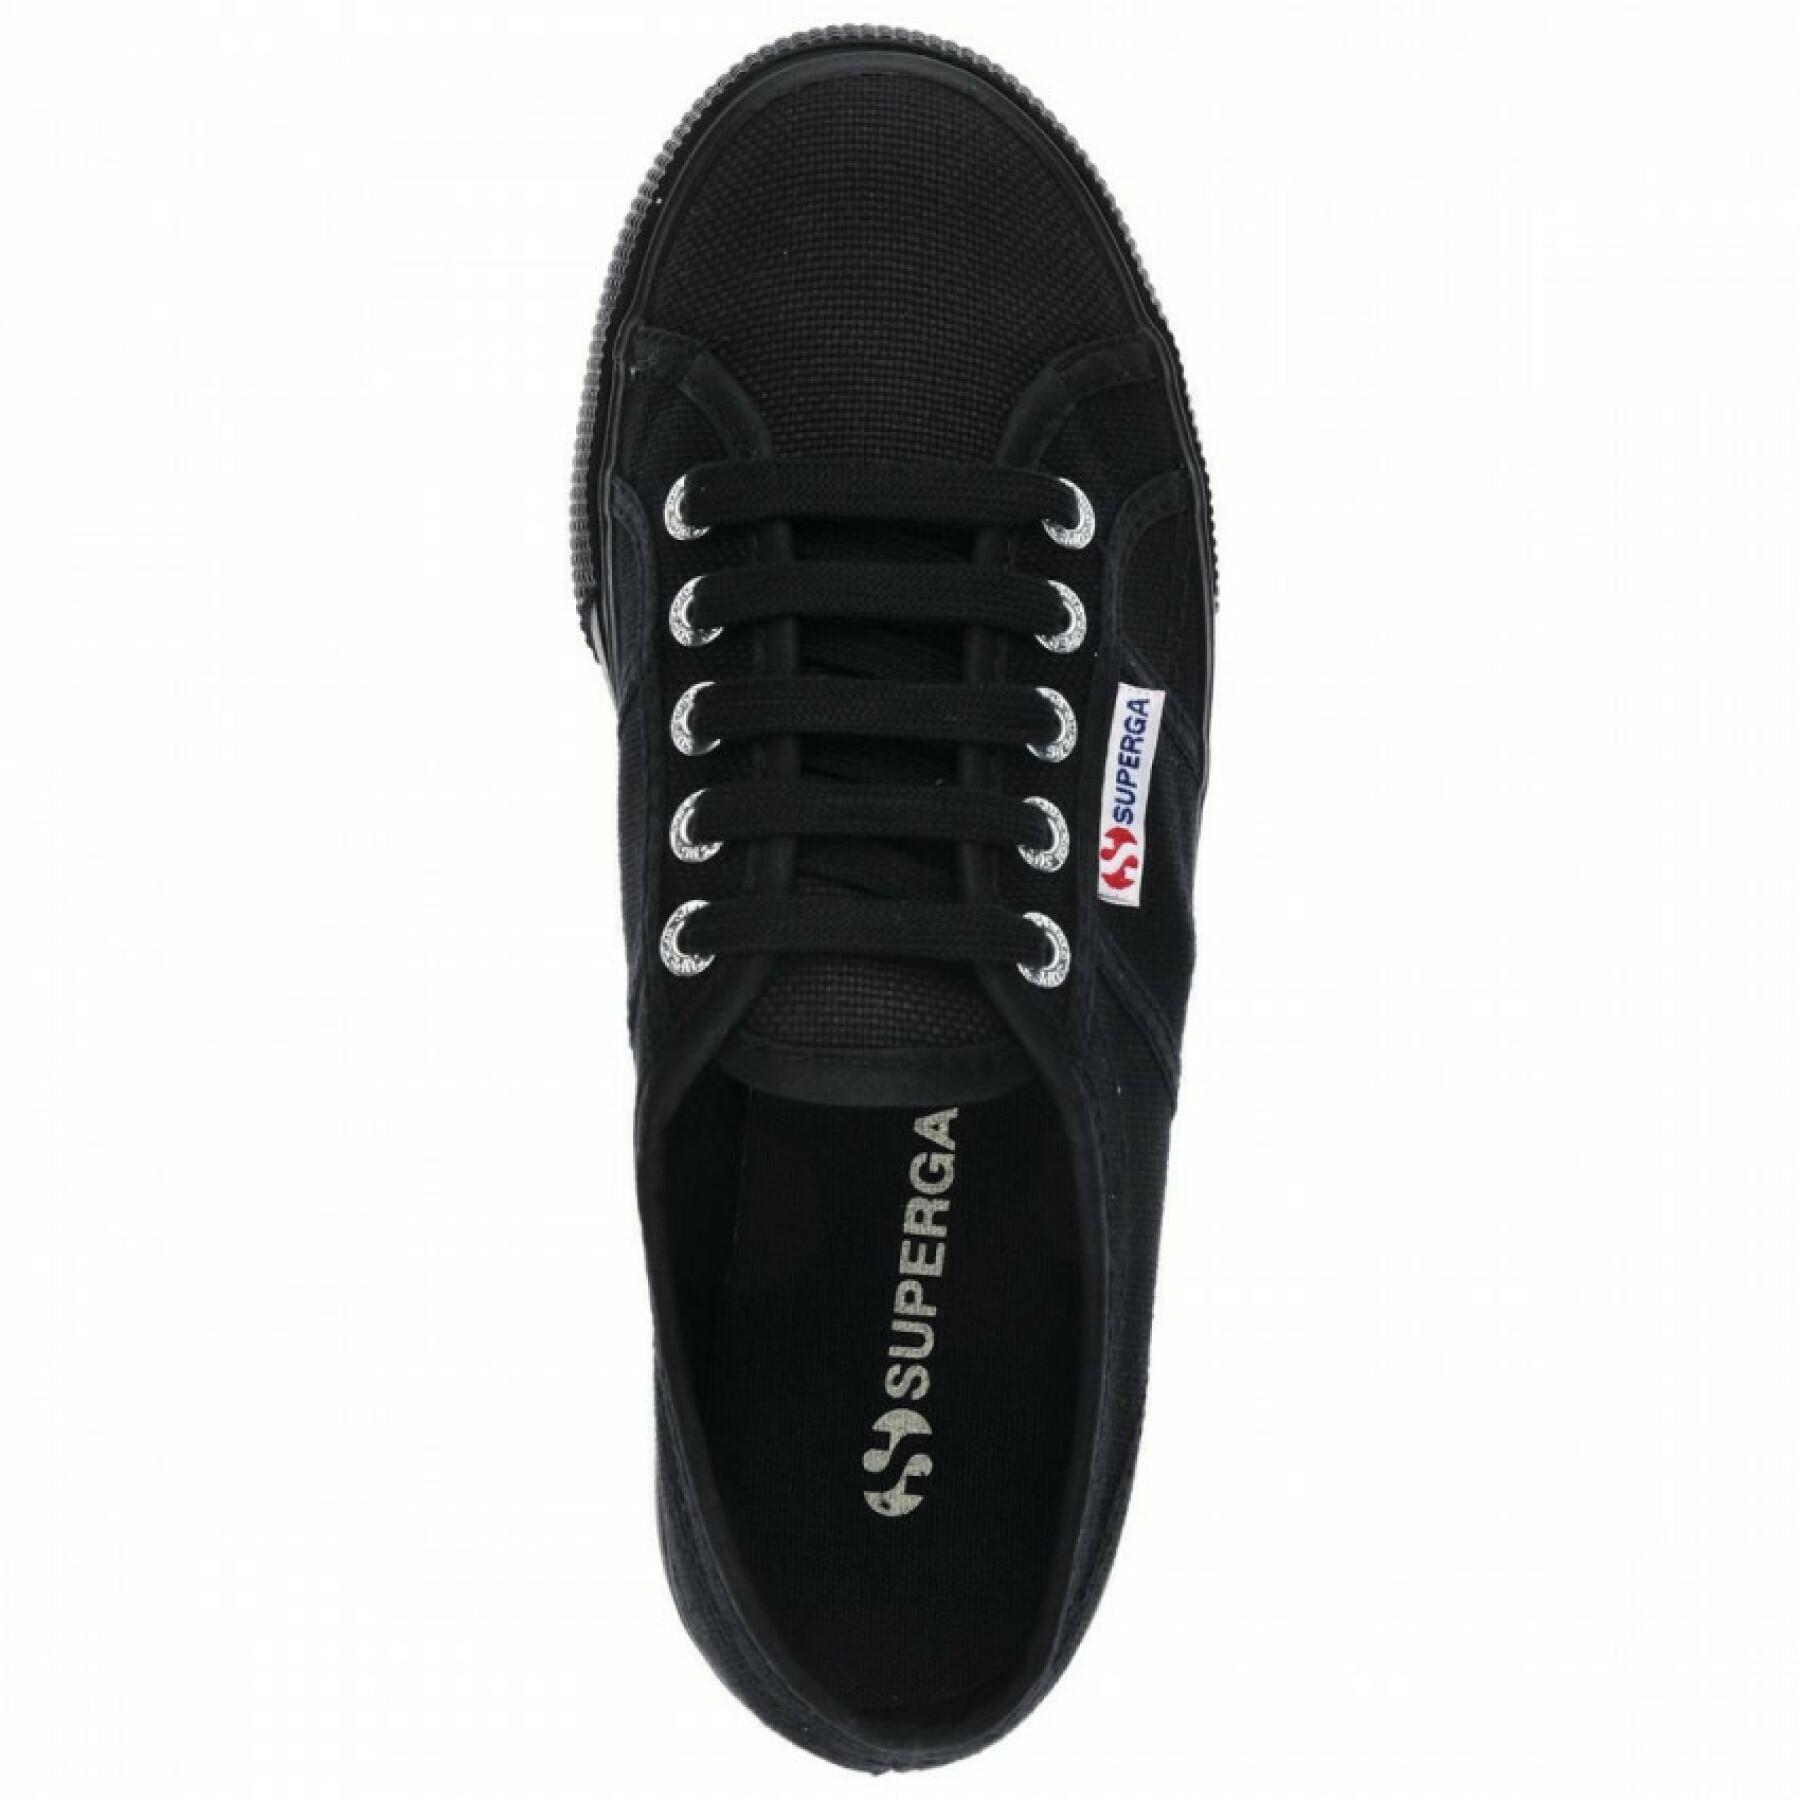 Sneakers für Frauen Superga 2790 Cotw Linea Up
And Do